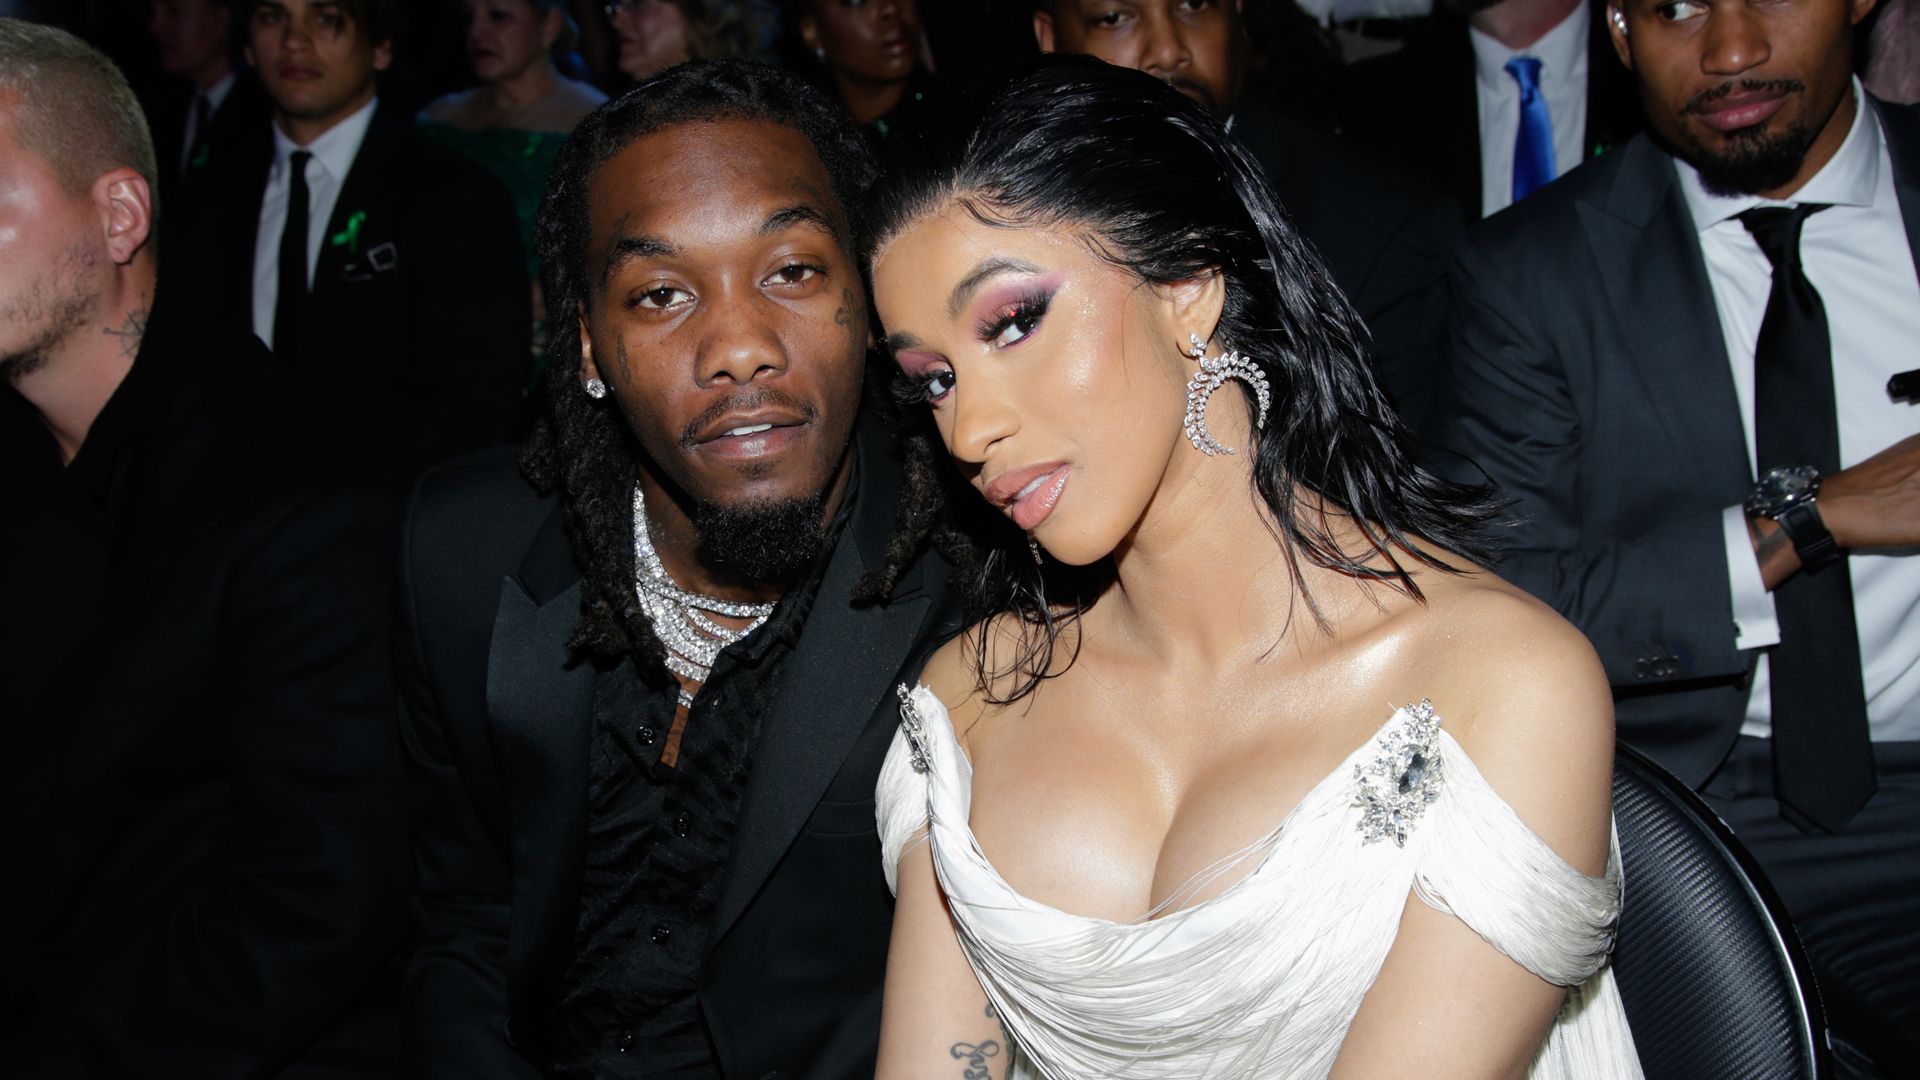 Offset and Cardi B attend THE 61ST ANNUAL GRAMMY AWARDS, broadcast live from the STAPLES Center in Los Angeles, Sunday, Feb. 10 on the CBS Television Network.